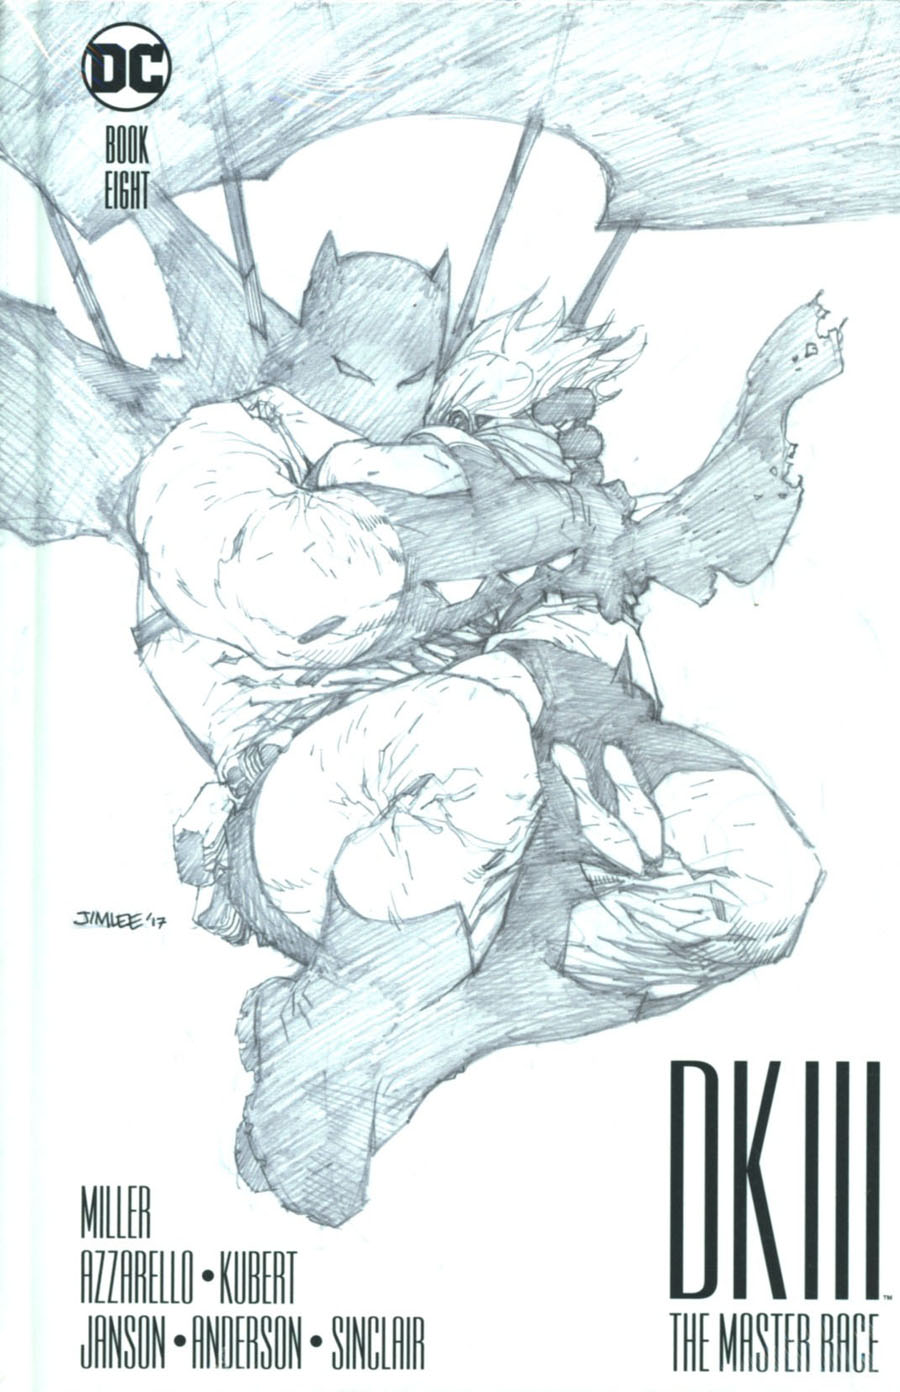 Dark Knight III The Master Race #8 Cover D Collectors Edition HC